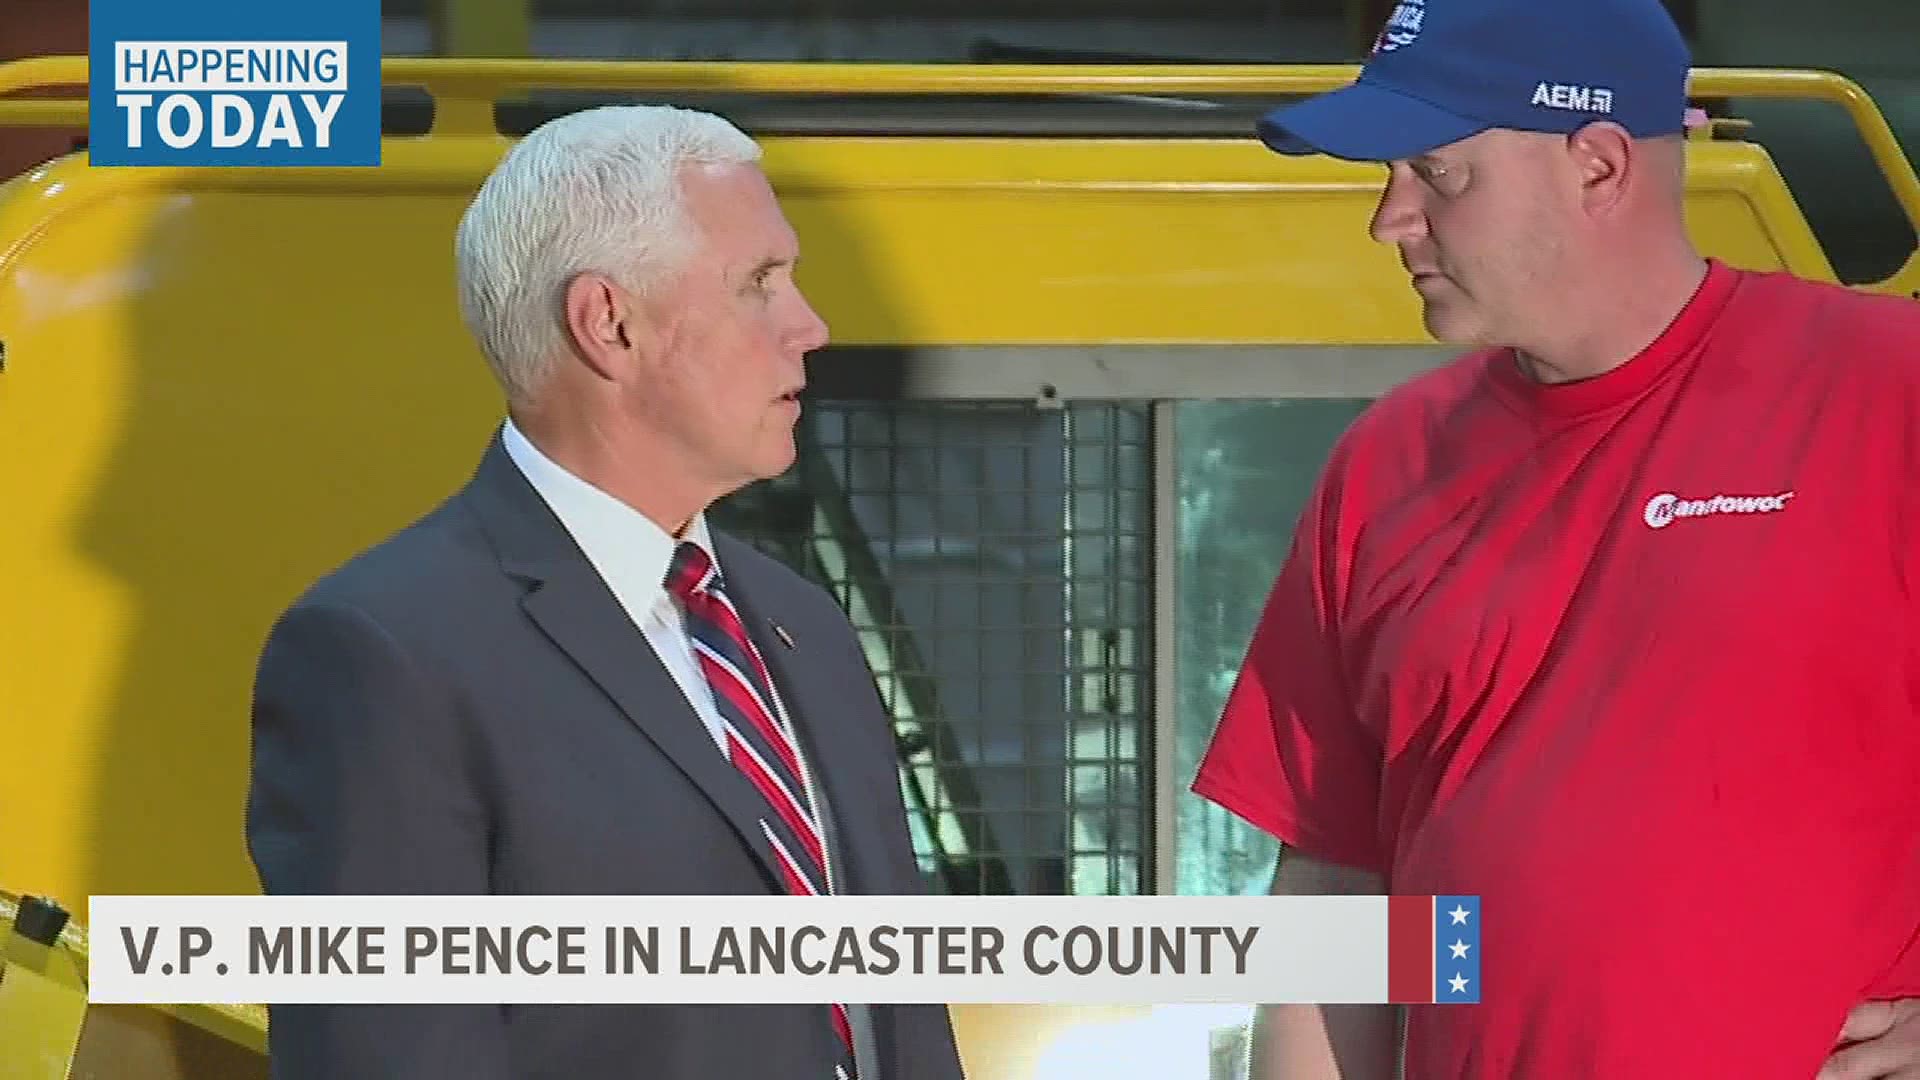 Vice President Mike Pence will travel to Lititz on Tuesday, September 29 to host a 'Make America Great Again!' watch party of the Presidential Debate.